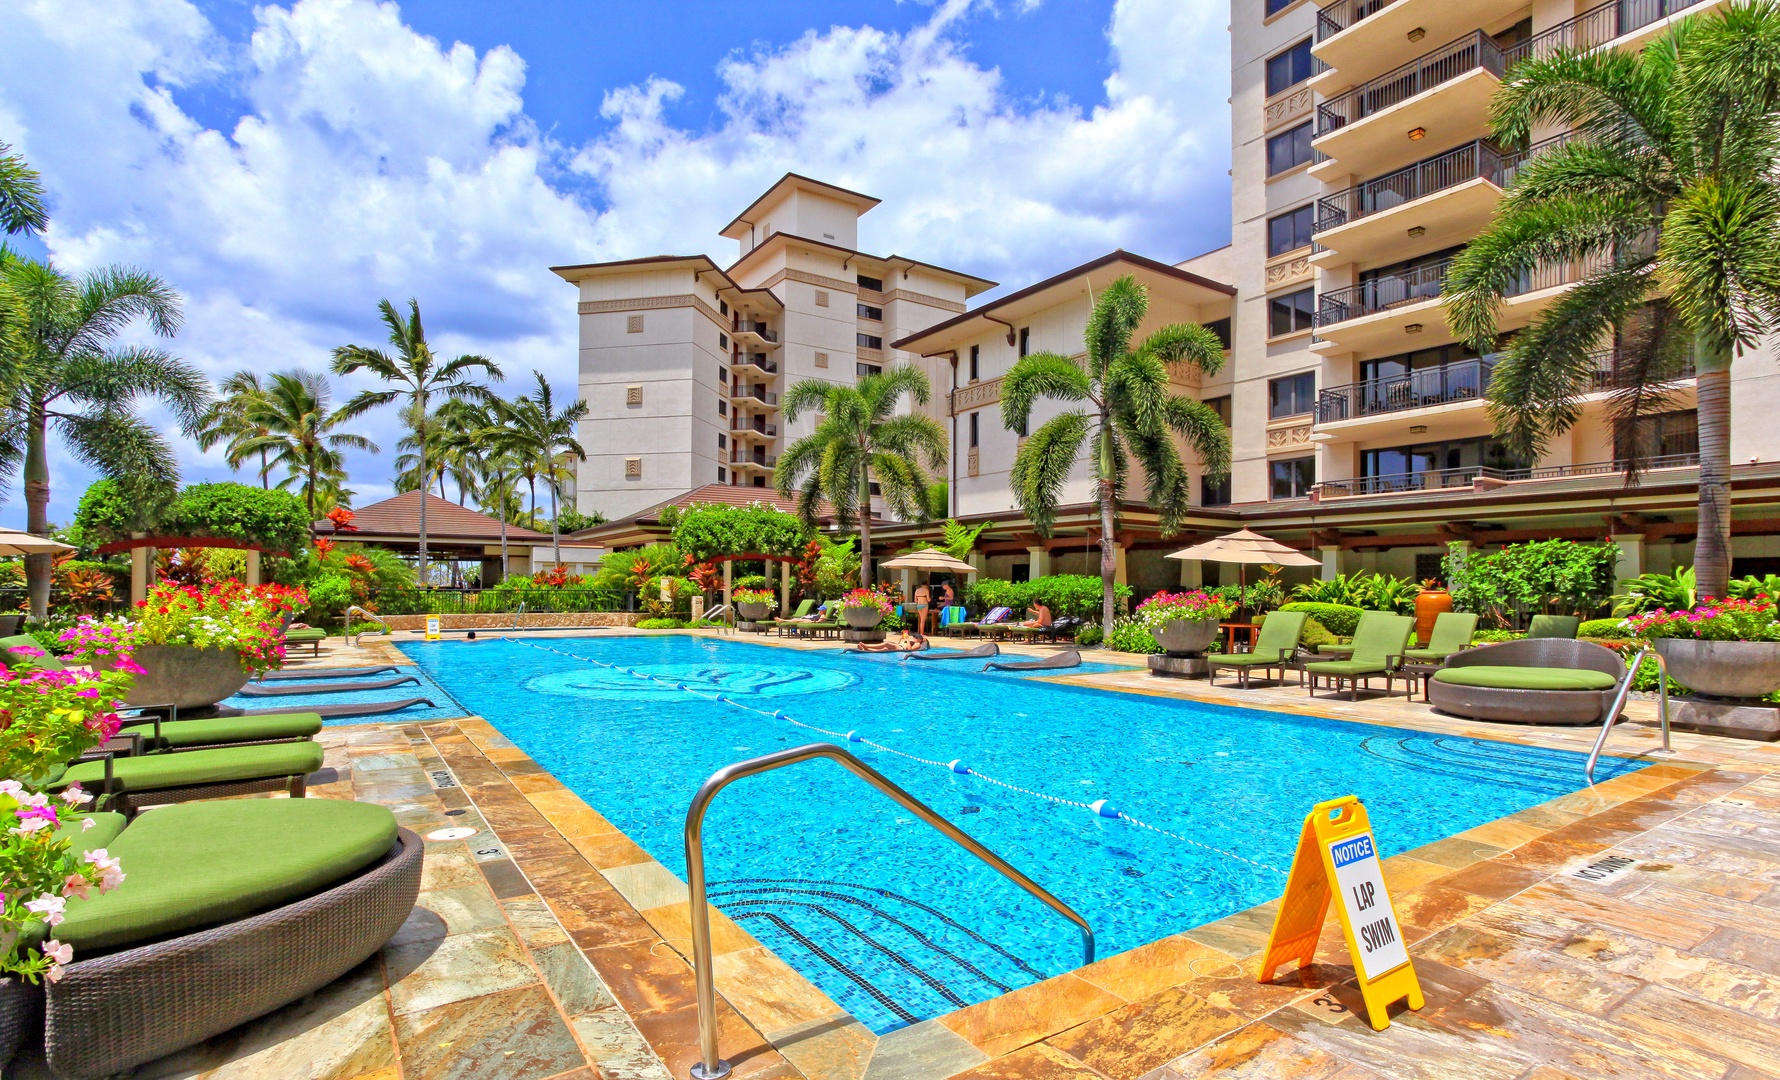 Kapolei Vacation Rentals, Ko Olina Beach Villas O1004 - The lap pool with lounge chairs, and table umbrellas.